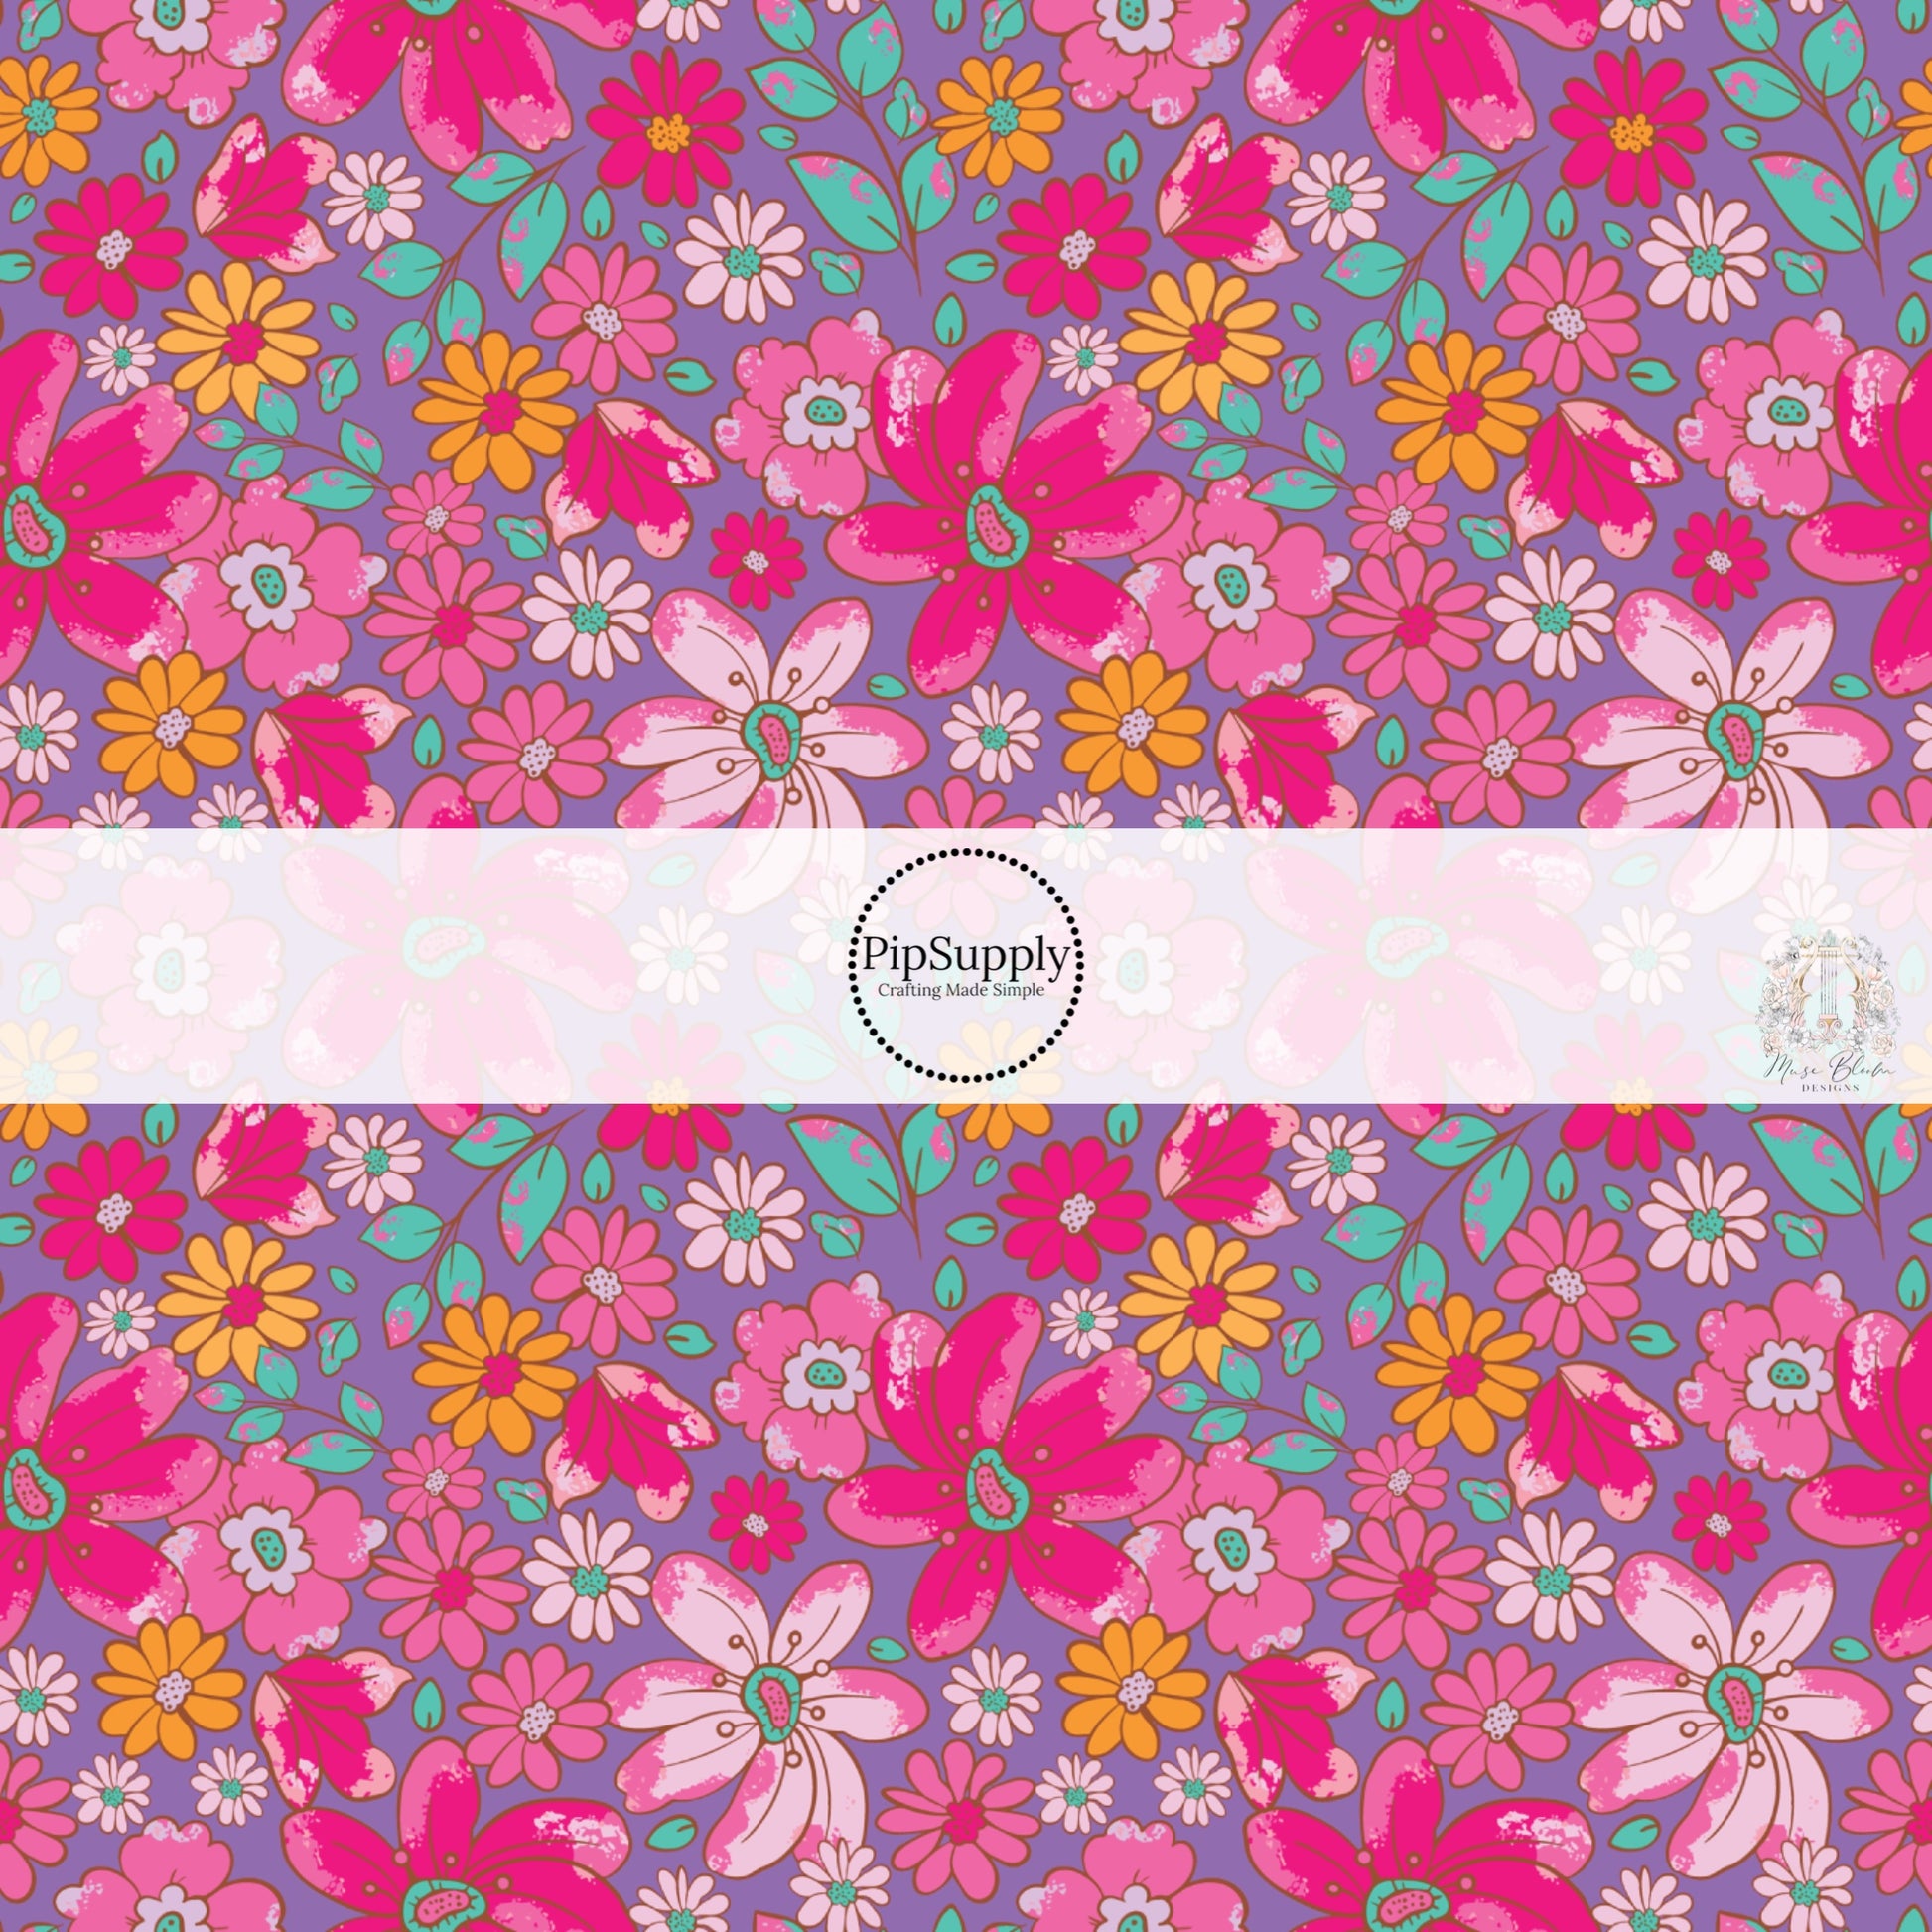 These floral themed purple no sew bow strips can be easily tied and attached to a clip for a finished hair bow. These fun summer floral themed bow strips features hot pink, orange, aqua, and light pink flowers on purple are great for personal use or to sell.